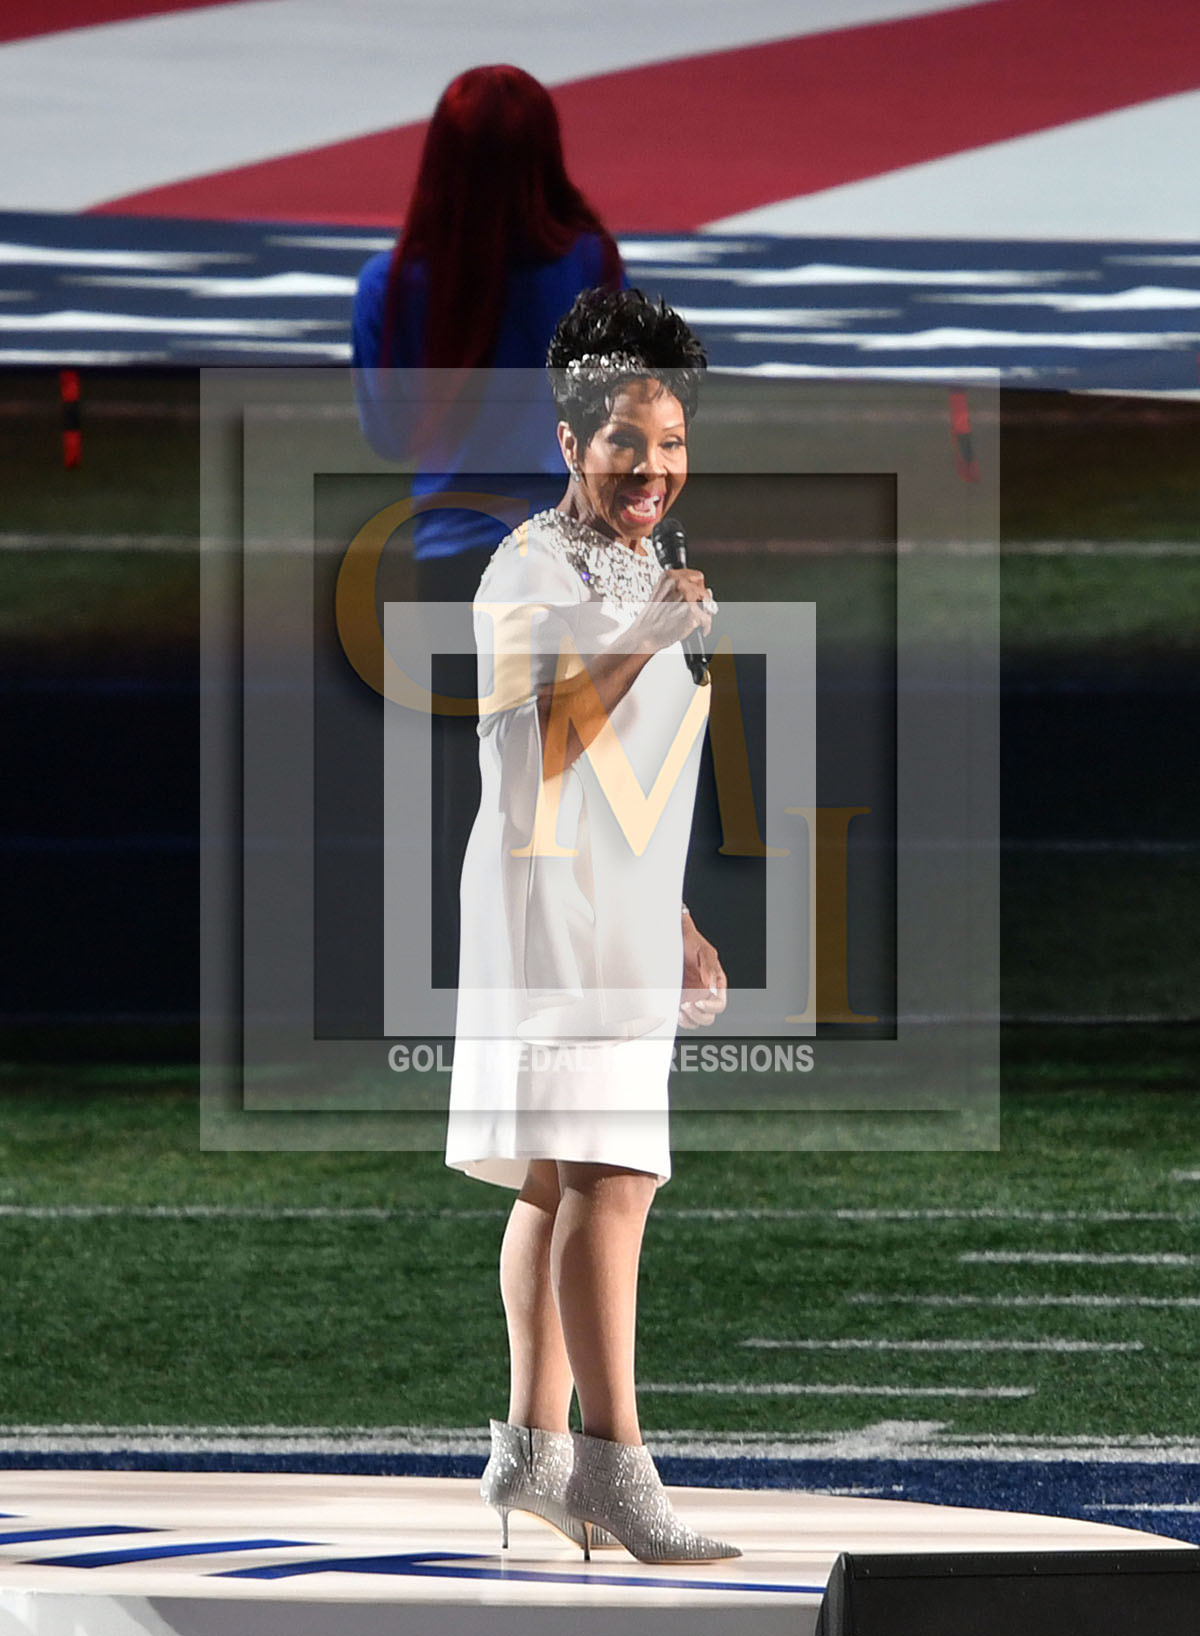 Gladys Knight performs during the halftime show at Super Bowl LIII